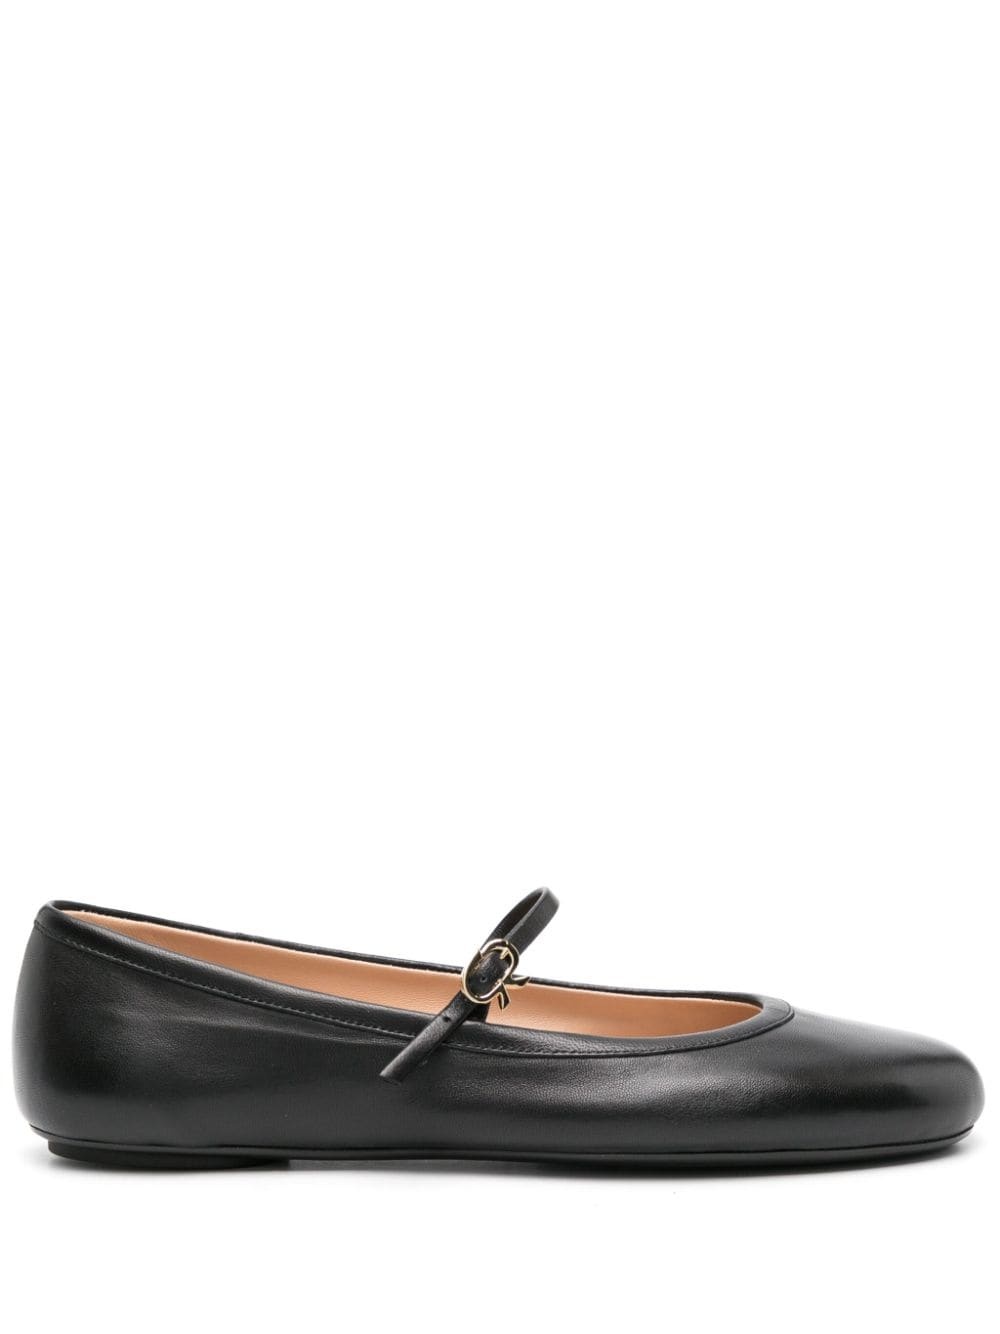 round-toe leather ballerina shoes - 1